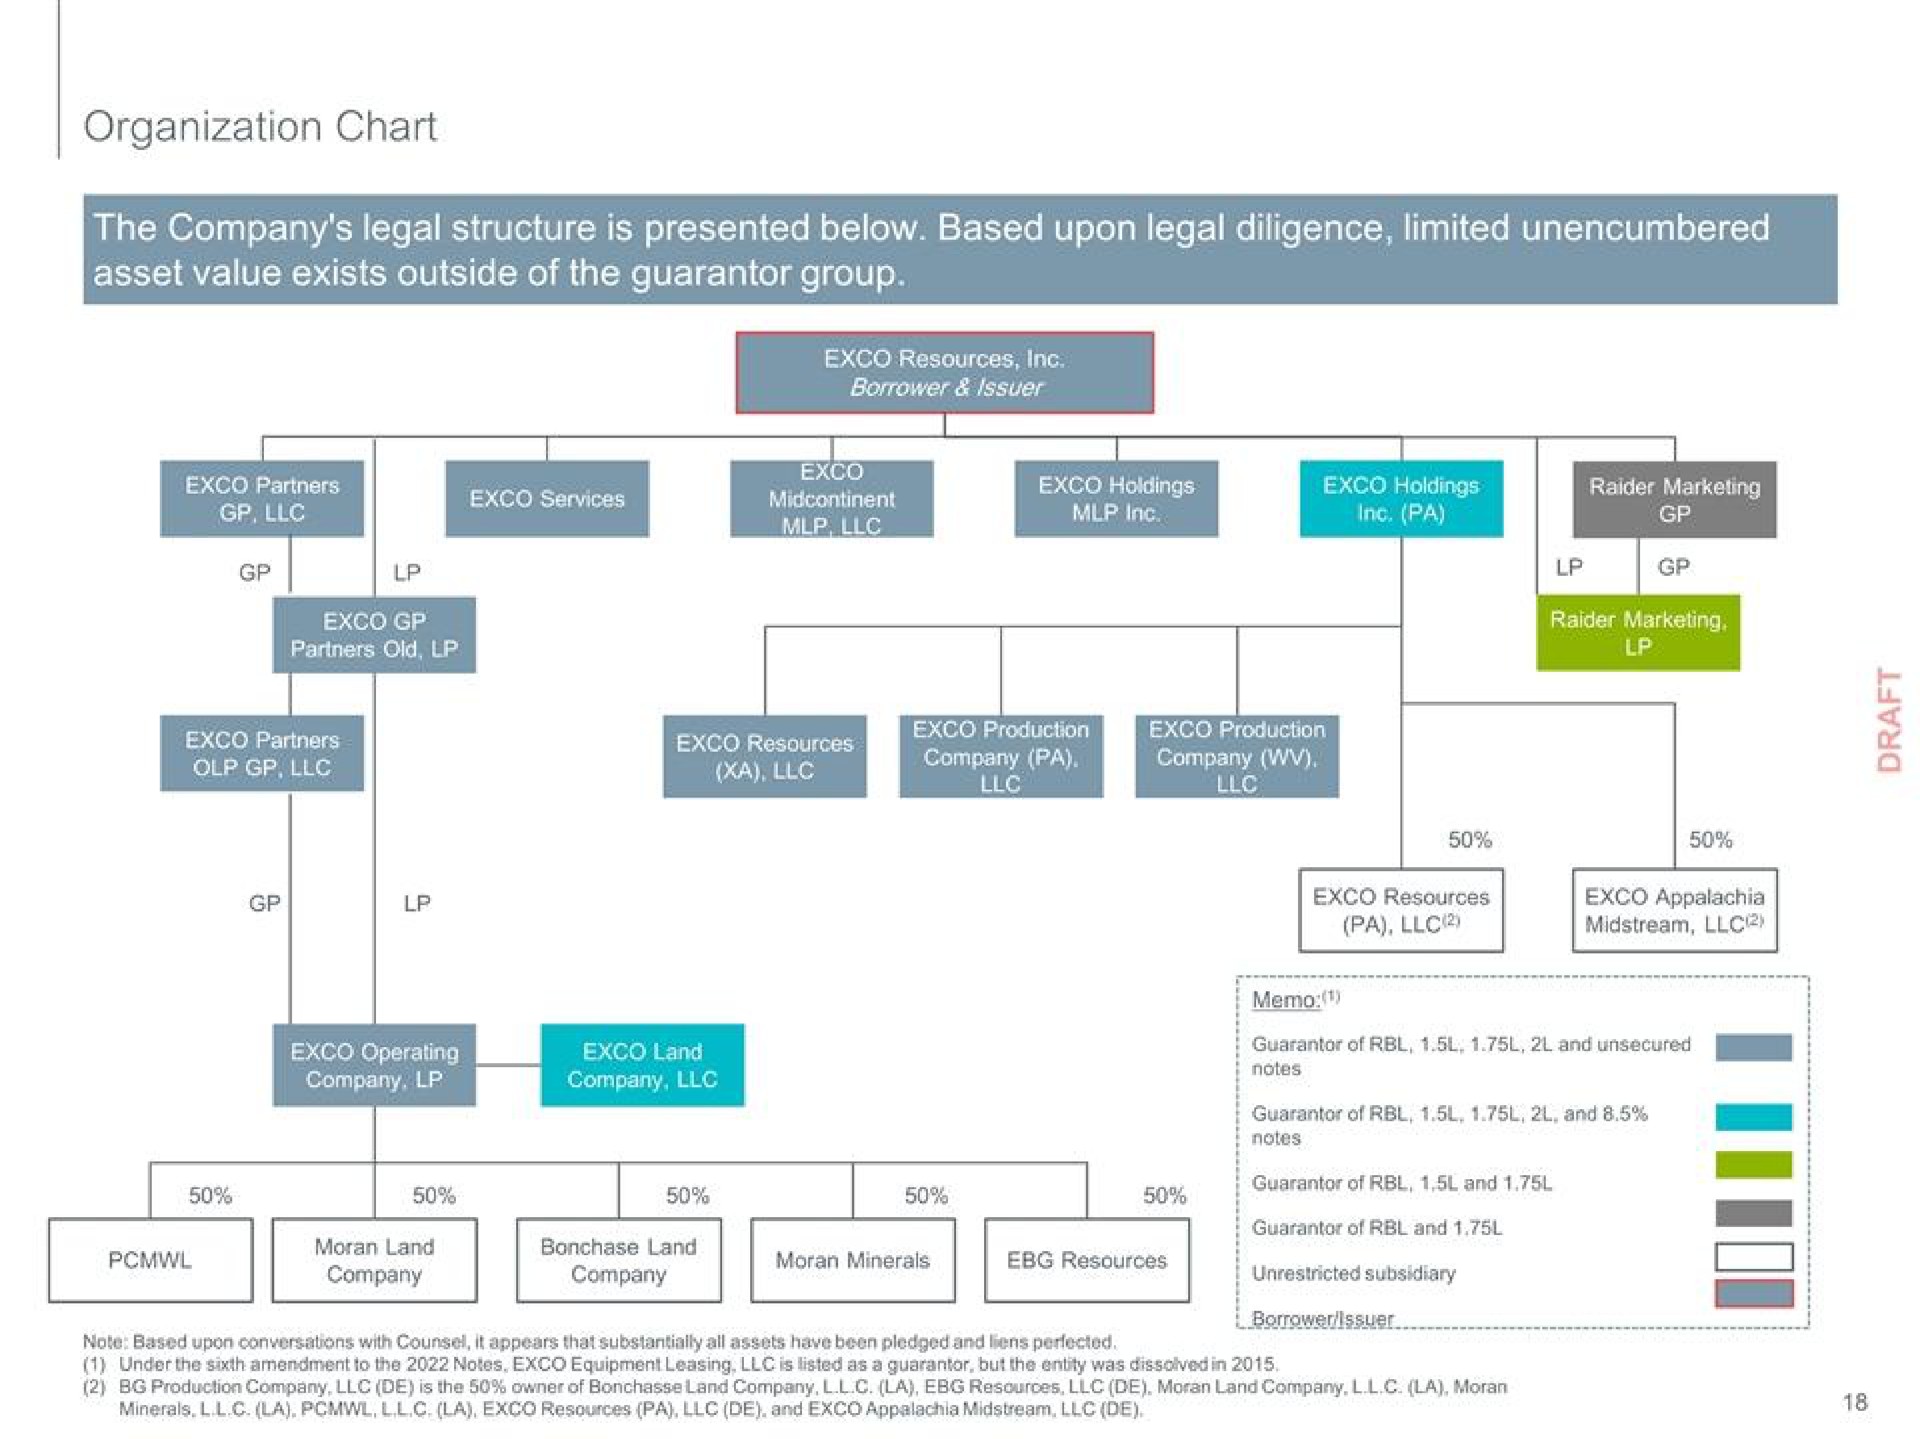 organization chart the company legal structure is presented below based upon legal diligence limited unencumbered asset value exists outside of the guarantor group see embers unrestricted | PJT Partners